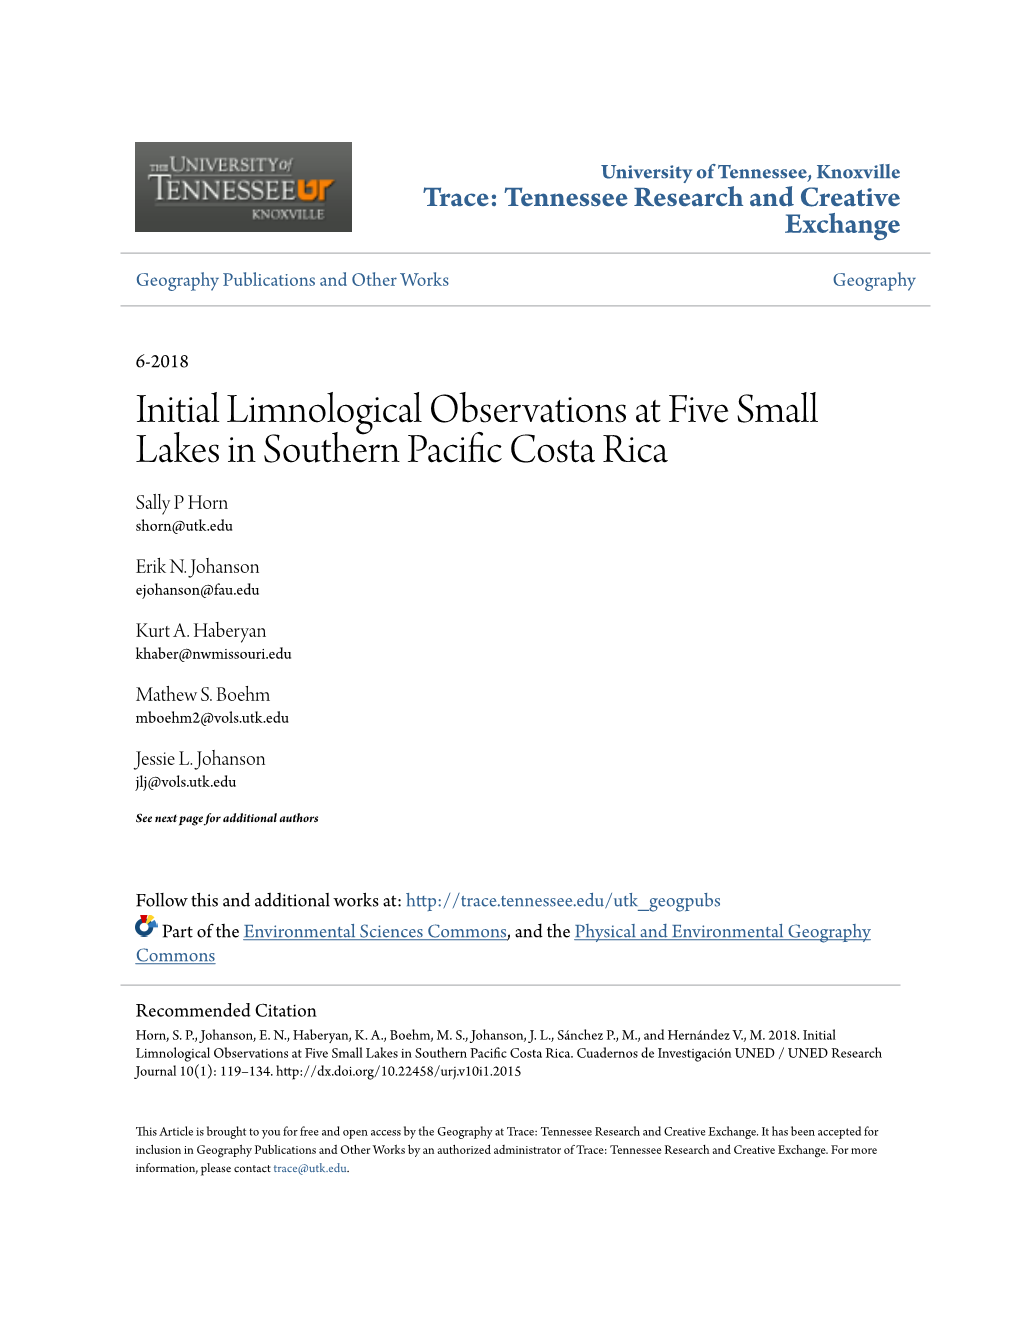 Initial Limnological Observations at Five Small Lakes in Southern Pacific Oc Sta Rica Sally P Horn Shorn@Utk.Edu